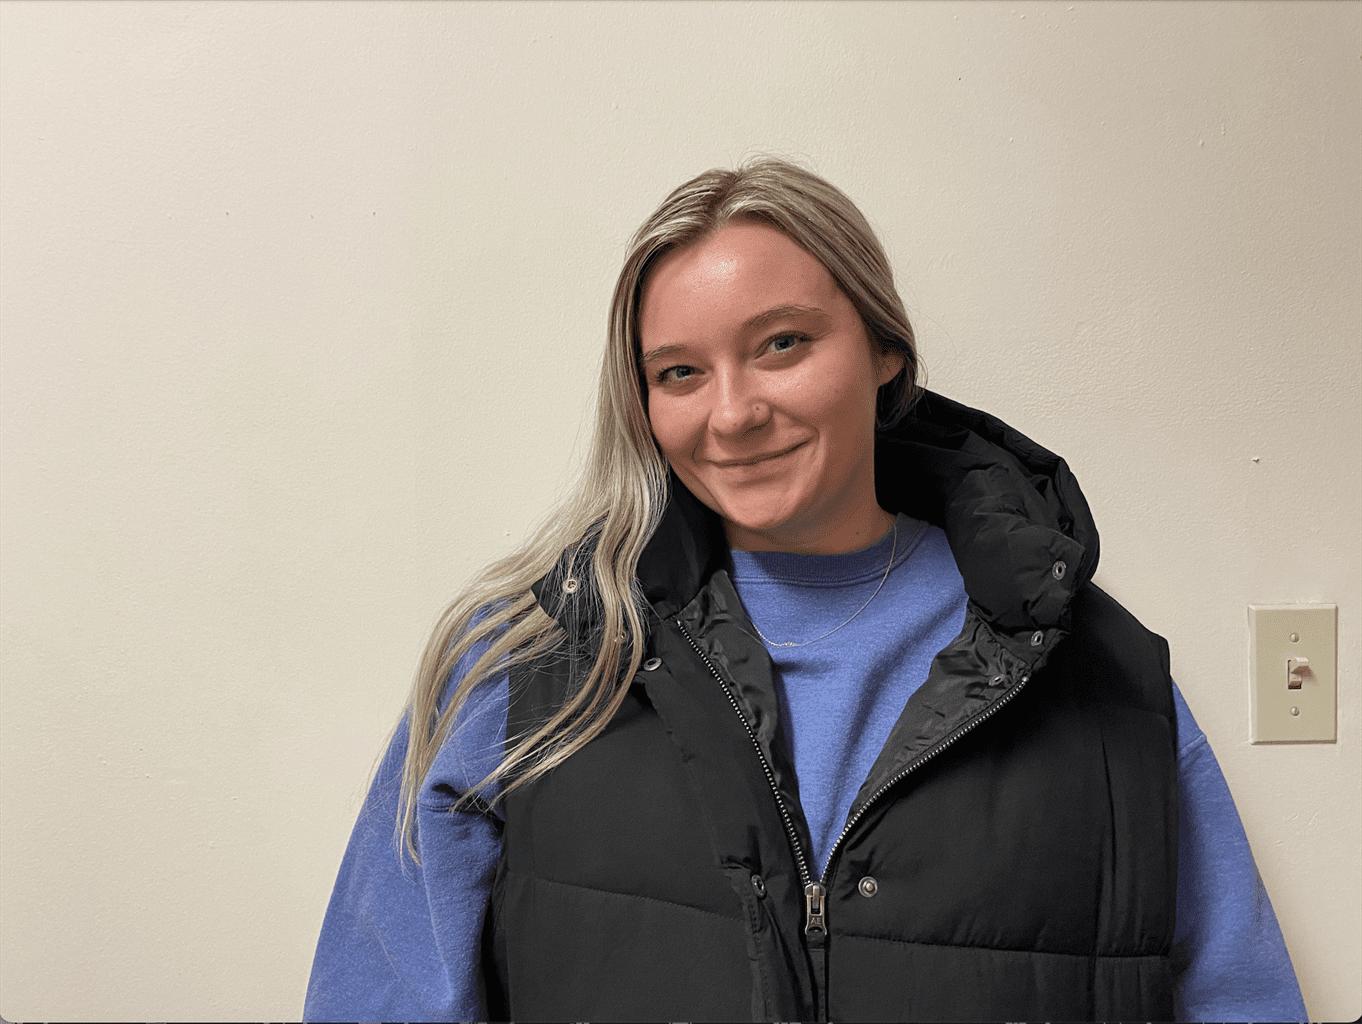 Samantha Seiser had her things covered in plasterboard dust.
Erin Lawlor | The Montclarion